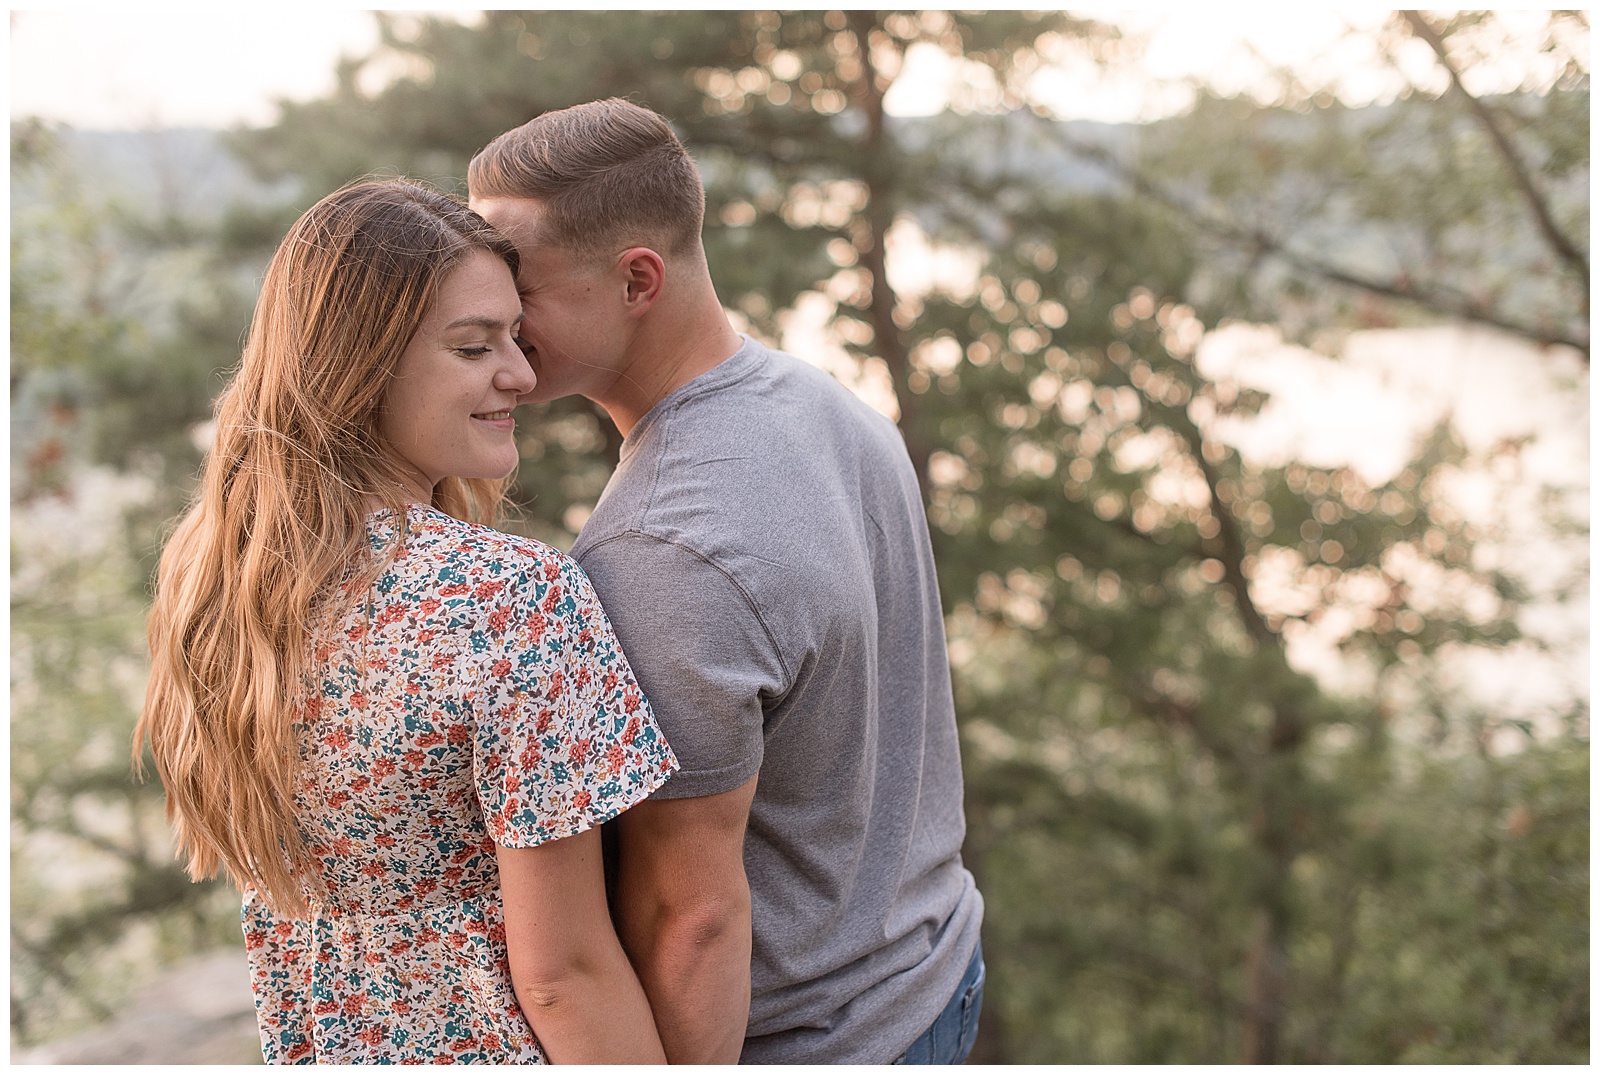 engaged couple with their backs toward camera as guy leans in and kisses girl on her left cheek and she smiles at pinnacle overlook